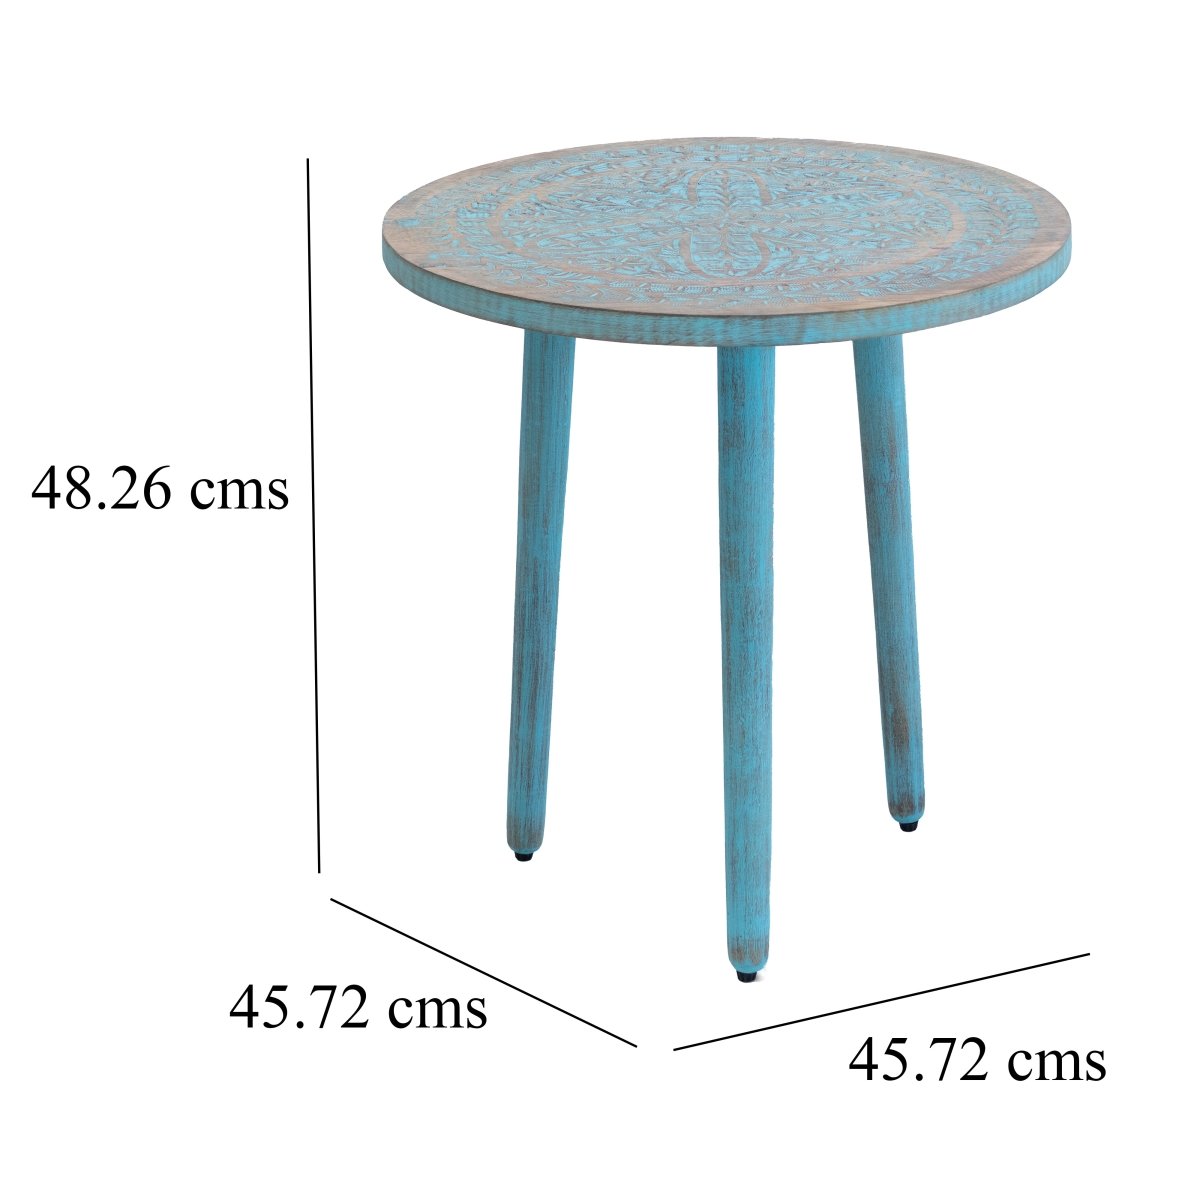 Kezevel Wooden Decorative Accent Table - Round Brown Blue Handcrafted Vintage End Table, Bedside Table, Side Stand, Stool